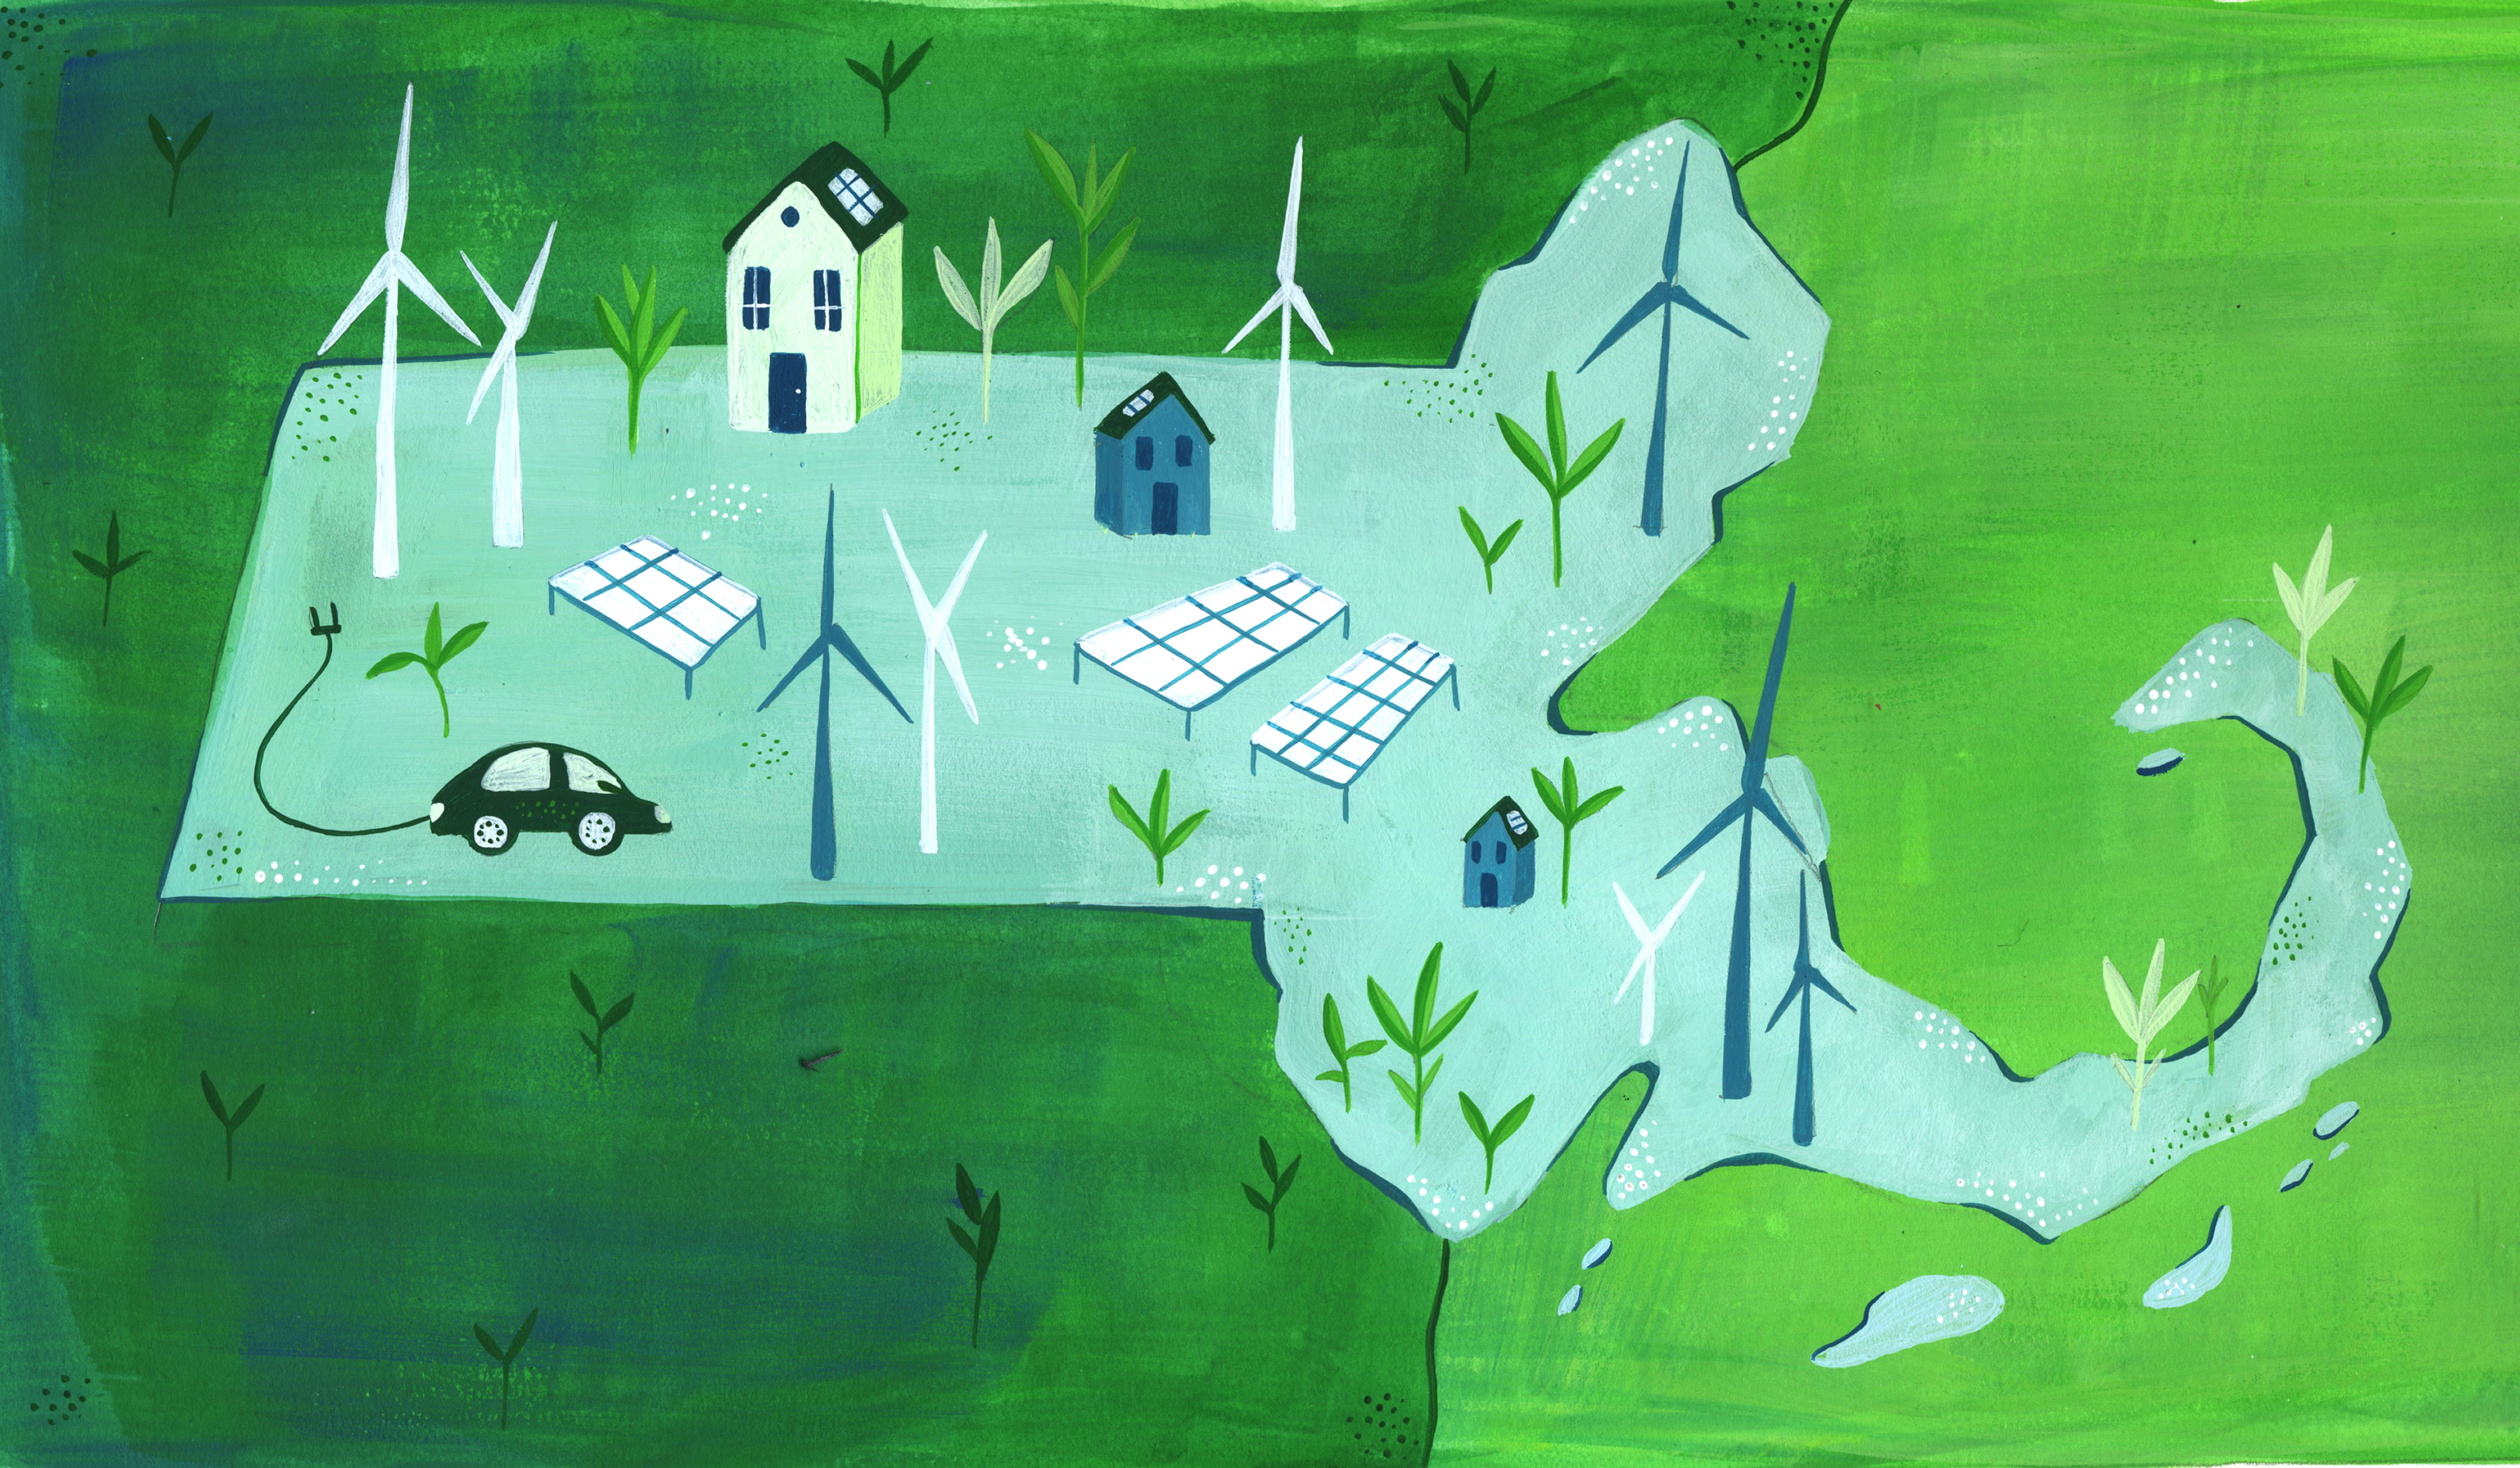 Massachusetts with renewable energy & clean homes, by Christine Rea